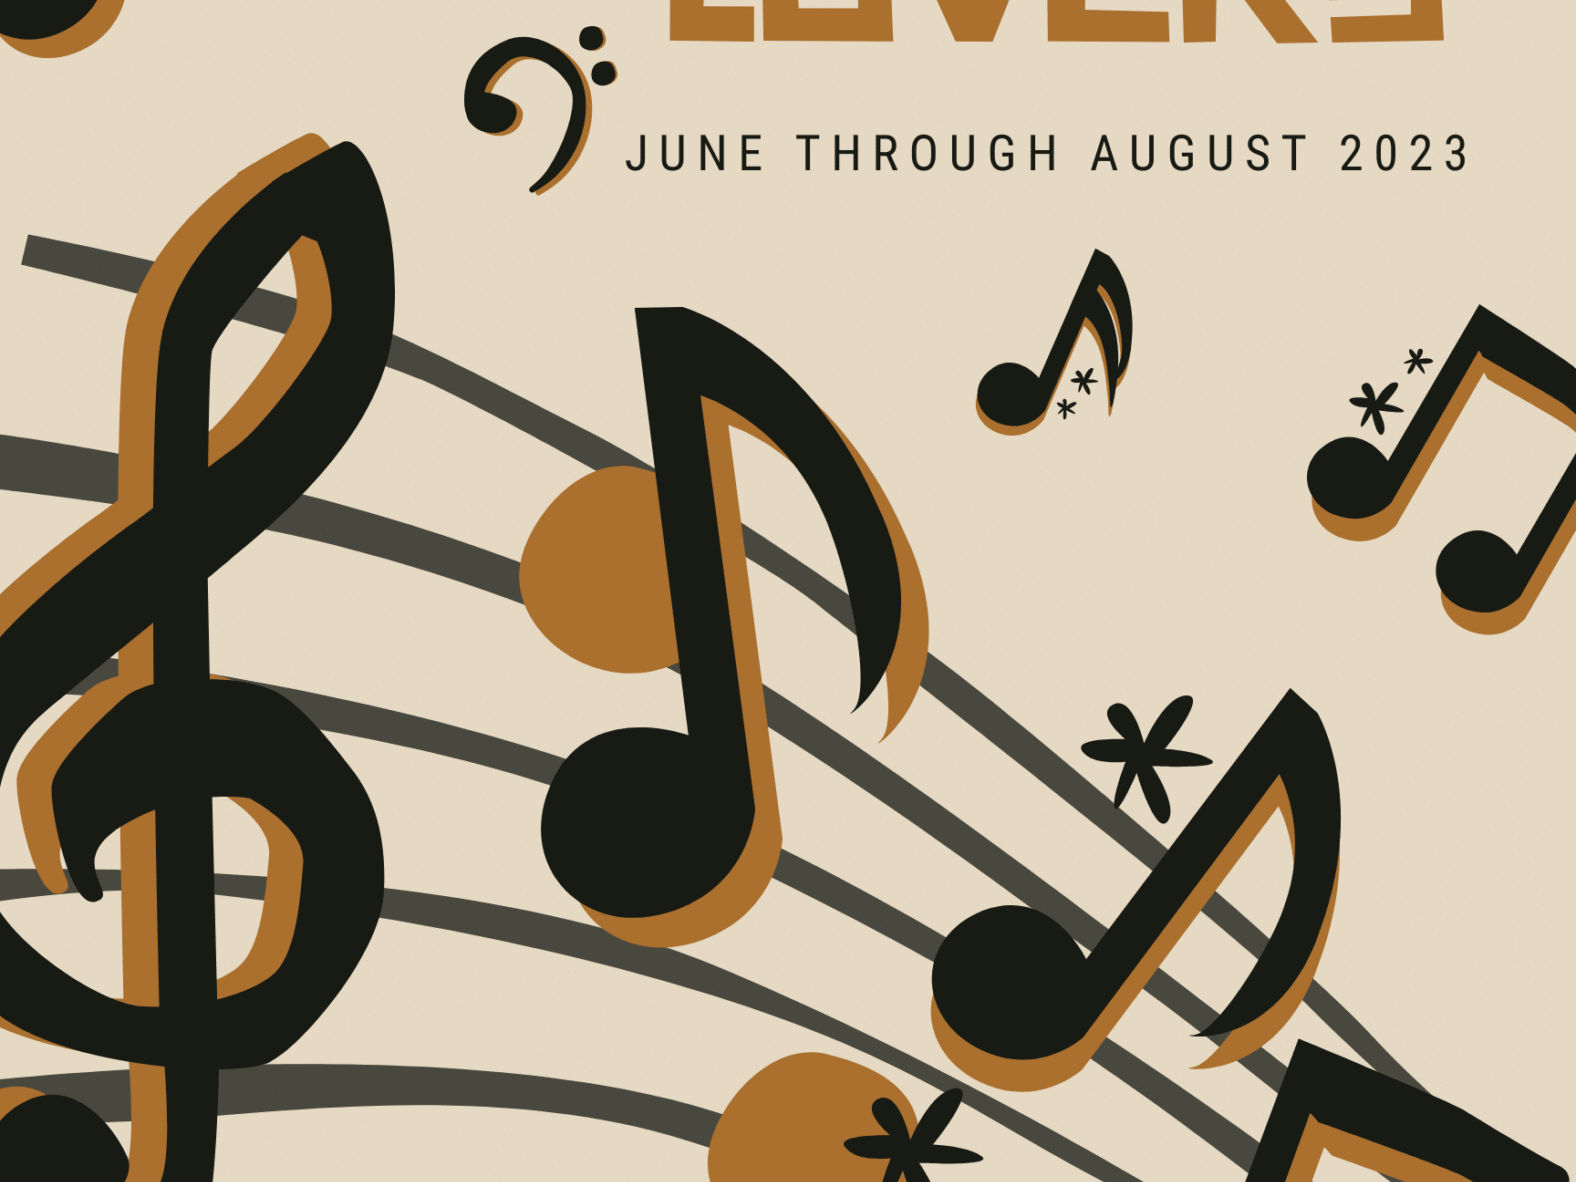 The Lion and the Rose Summer of Music Discount